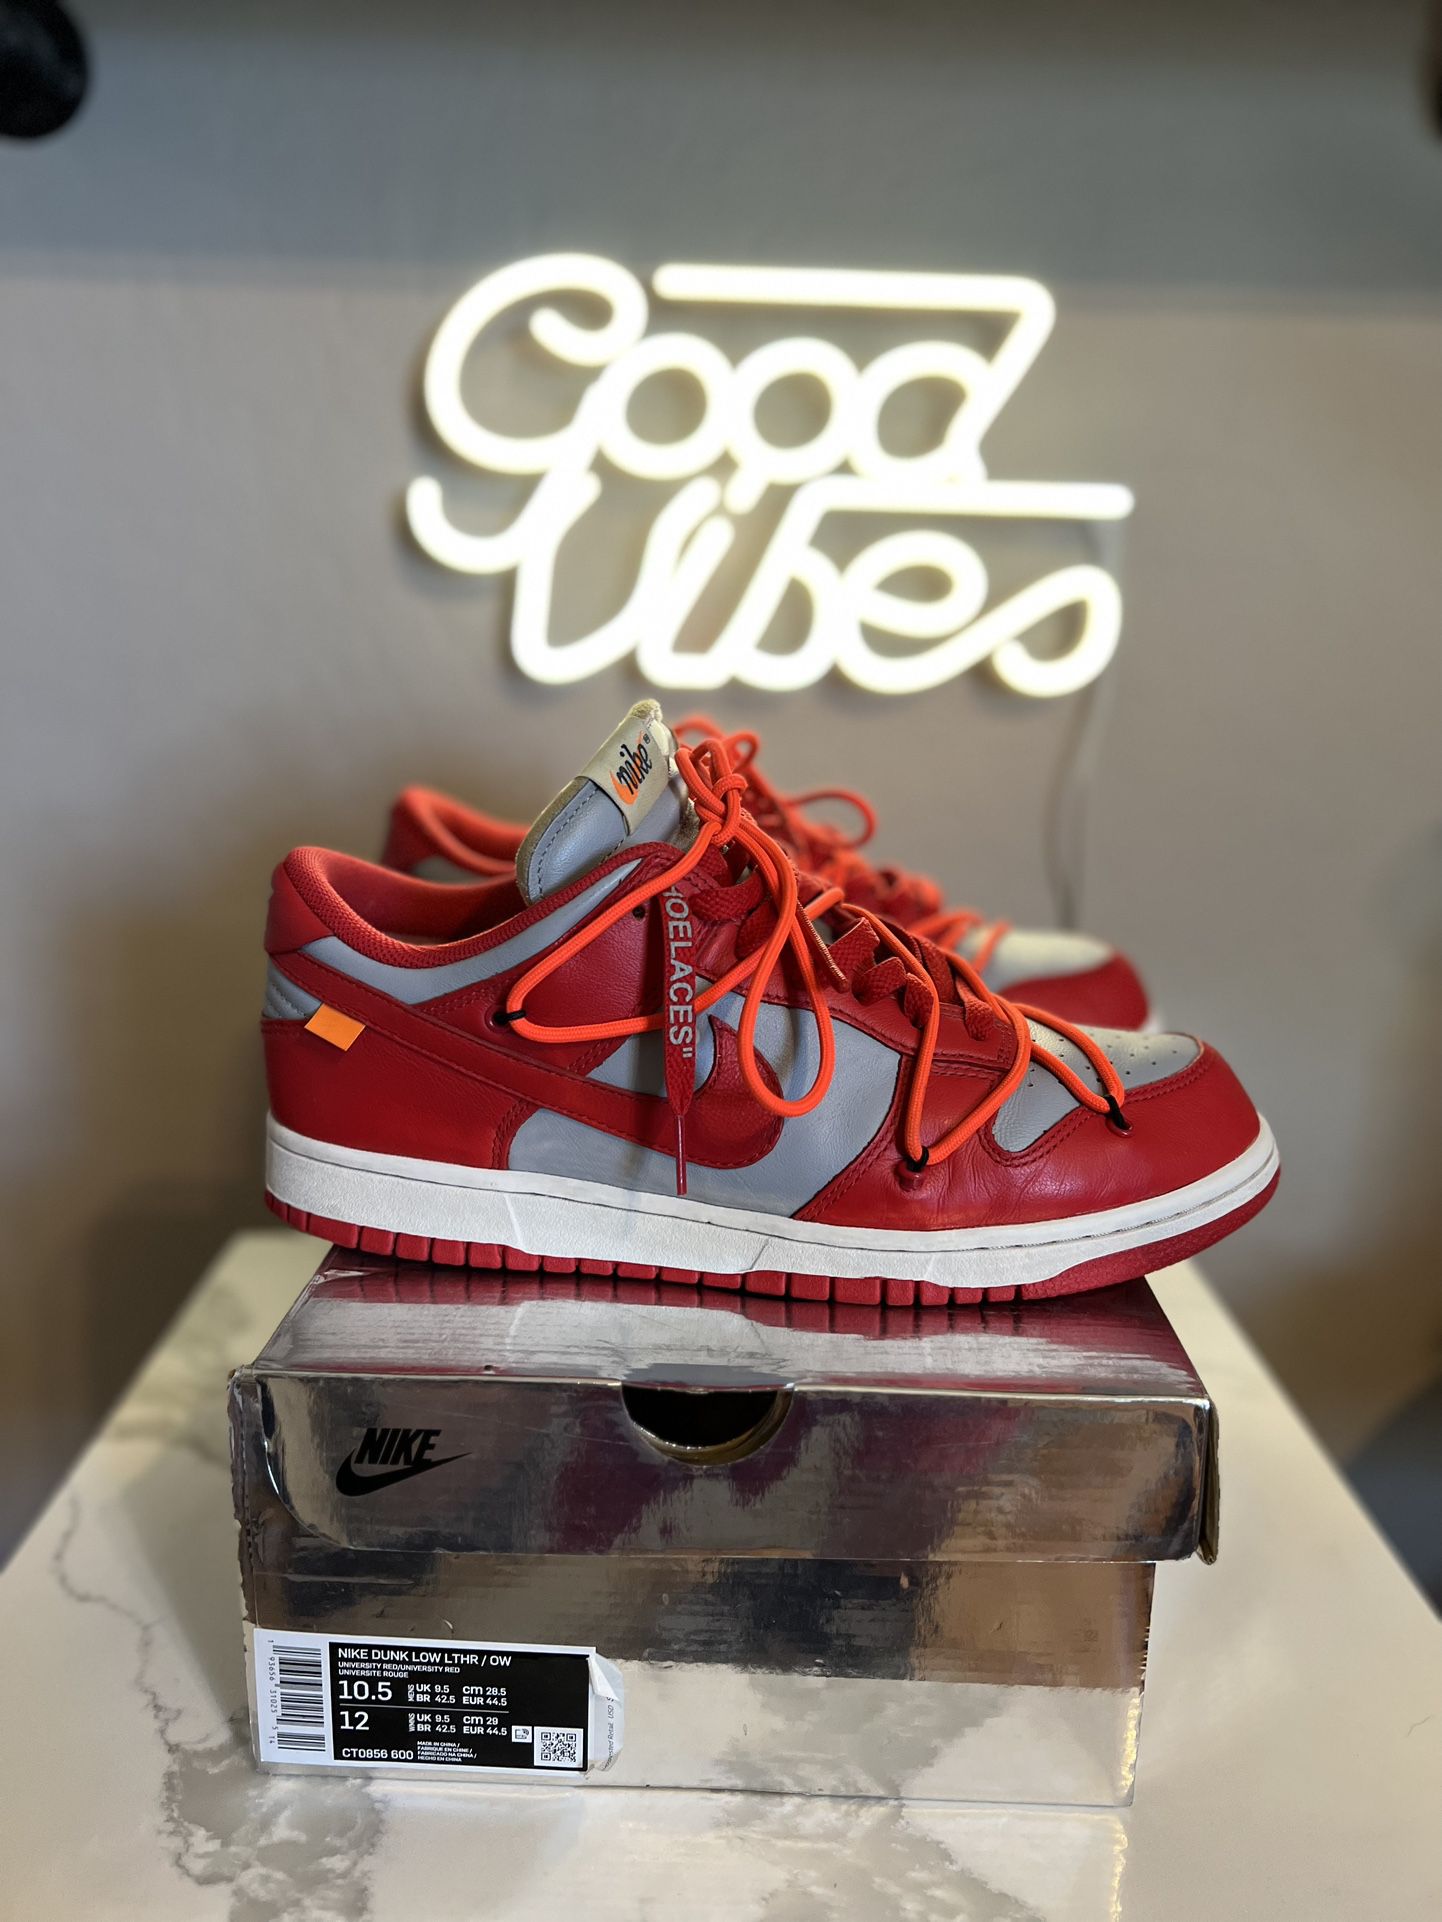 Nike Off-White Dunk Low ‘University low’ Size 10.5 